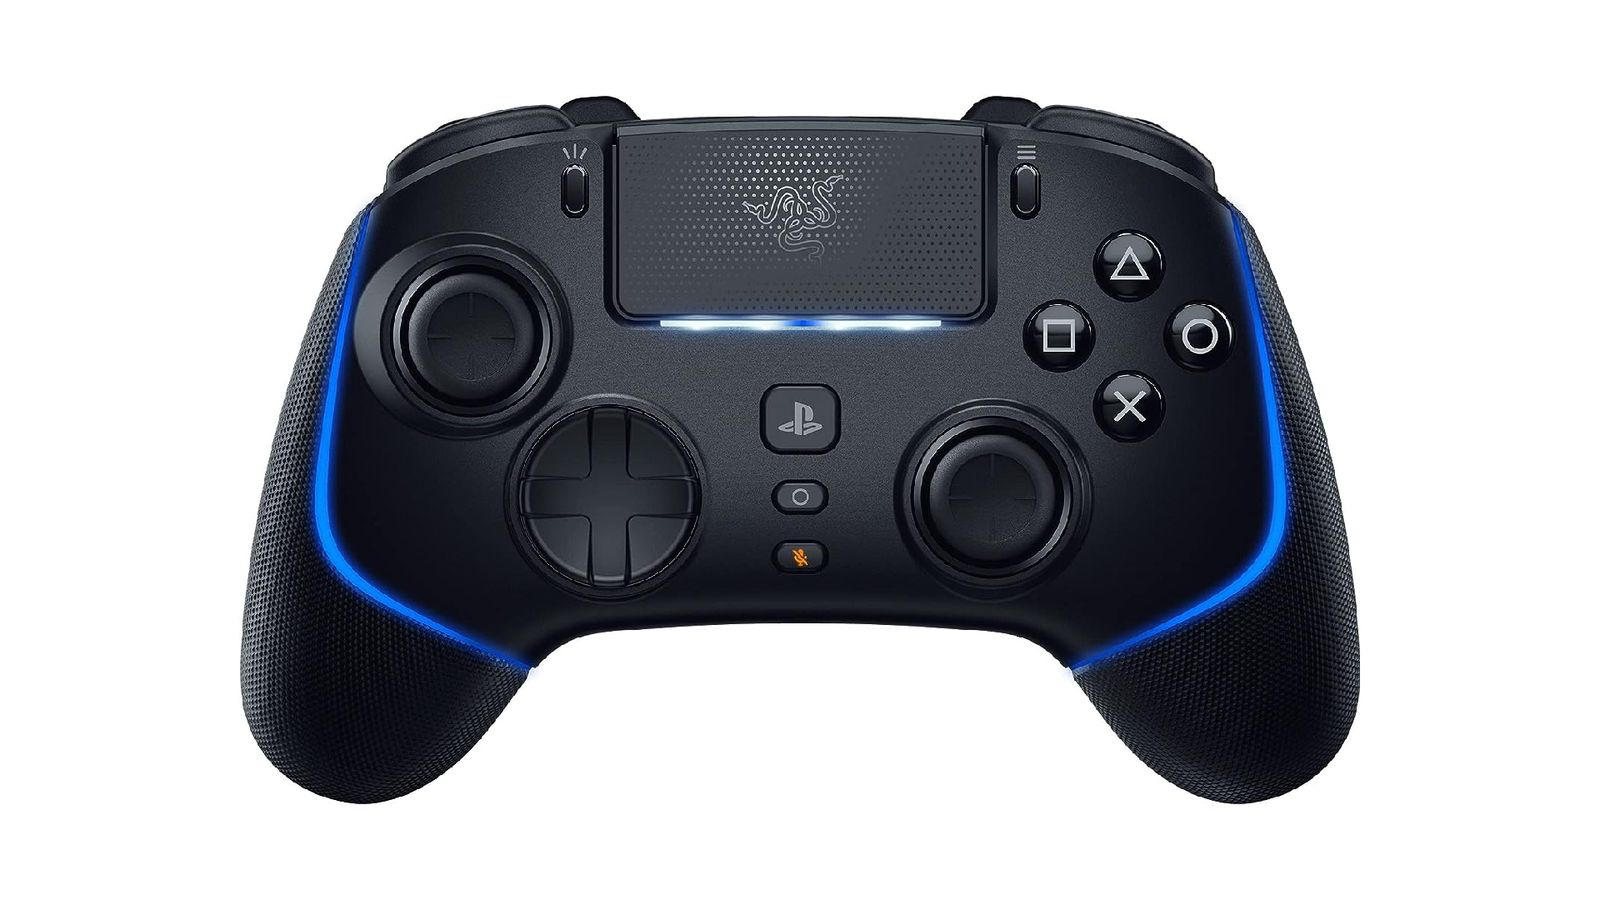 Razer Wolverine V2 Pro product image of a black PlayStation-branded gamepad featuring blue lighting.